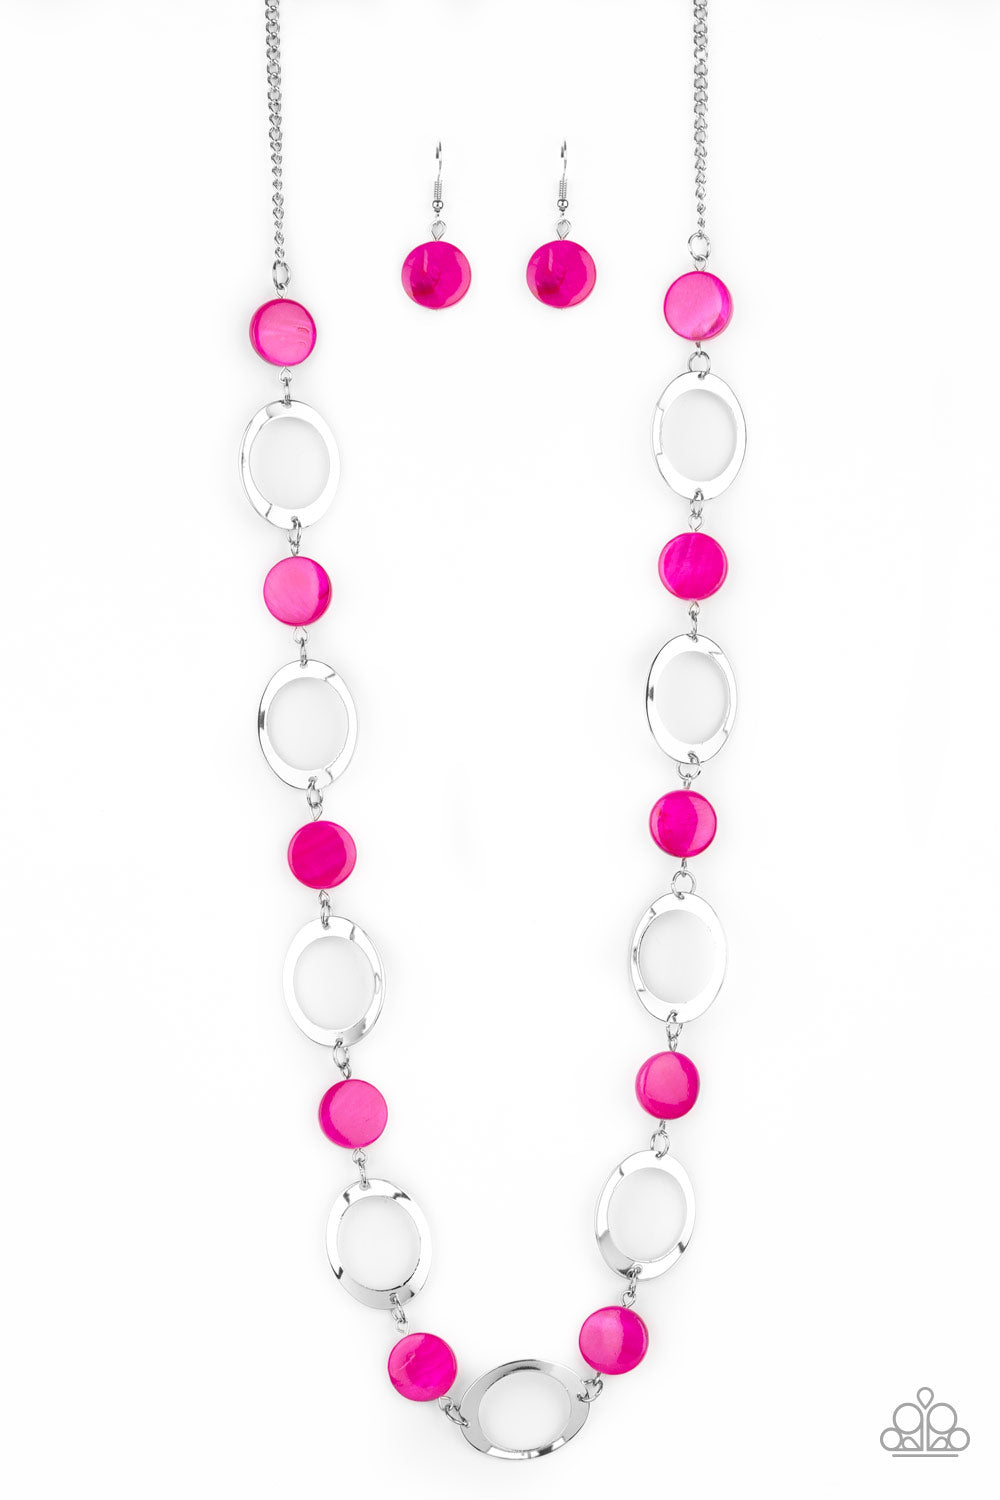 Paparazzi Necklaces - Shell Your Soul - Pink